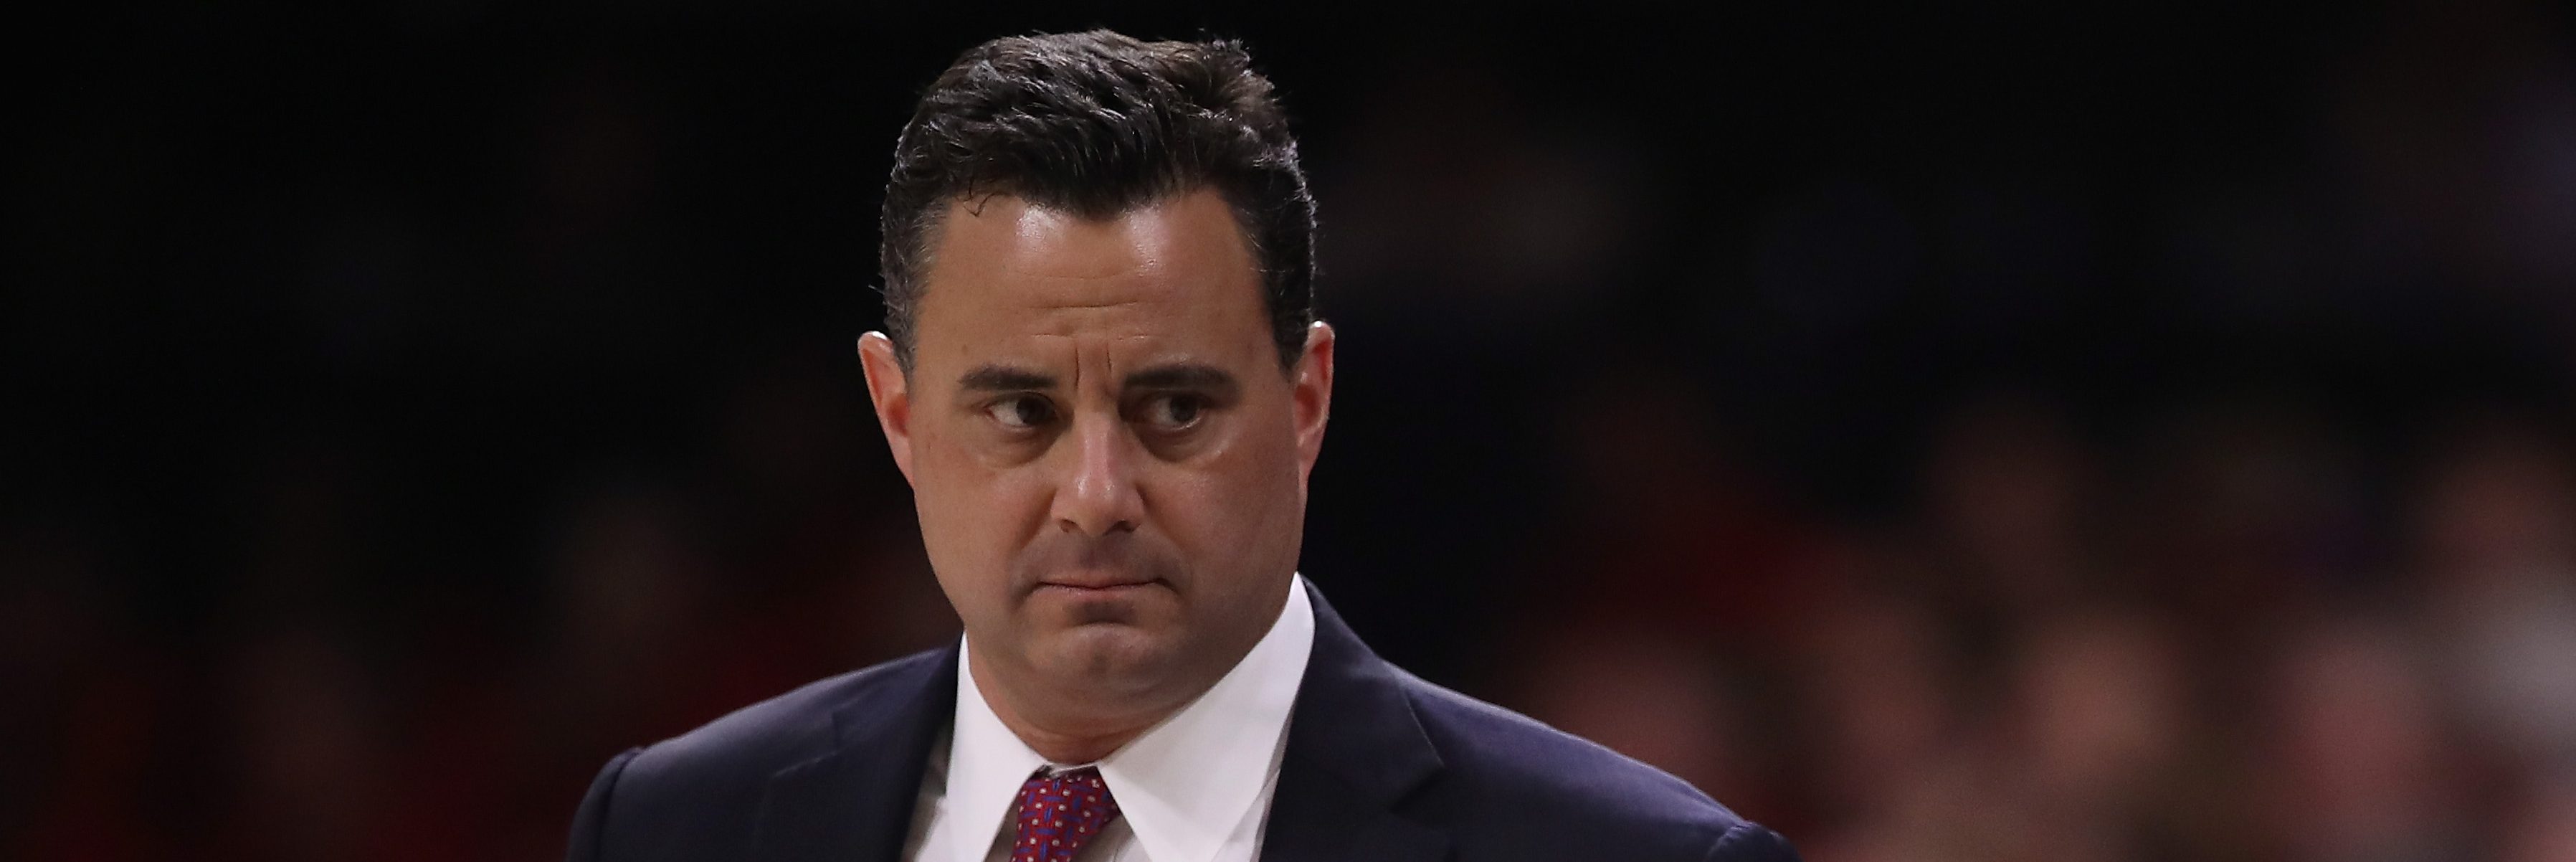 Head coach Sean Miller of the Arizona Wildcats reacts during the second half of a college basketball game against the California Golden Bears (Photo by Christian Petersen/Getty Images)